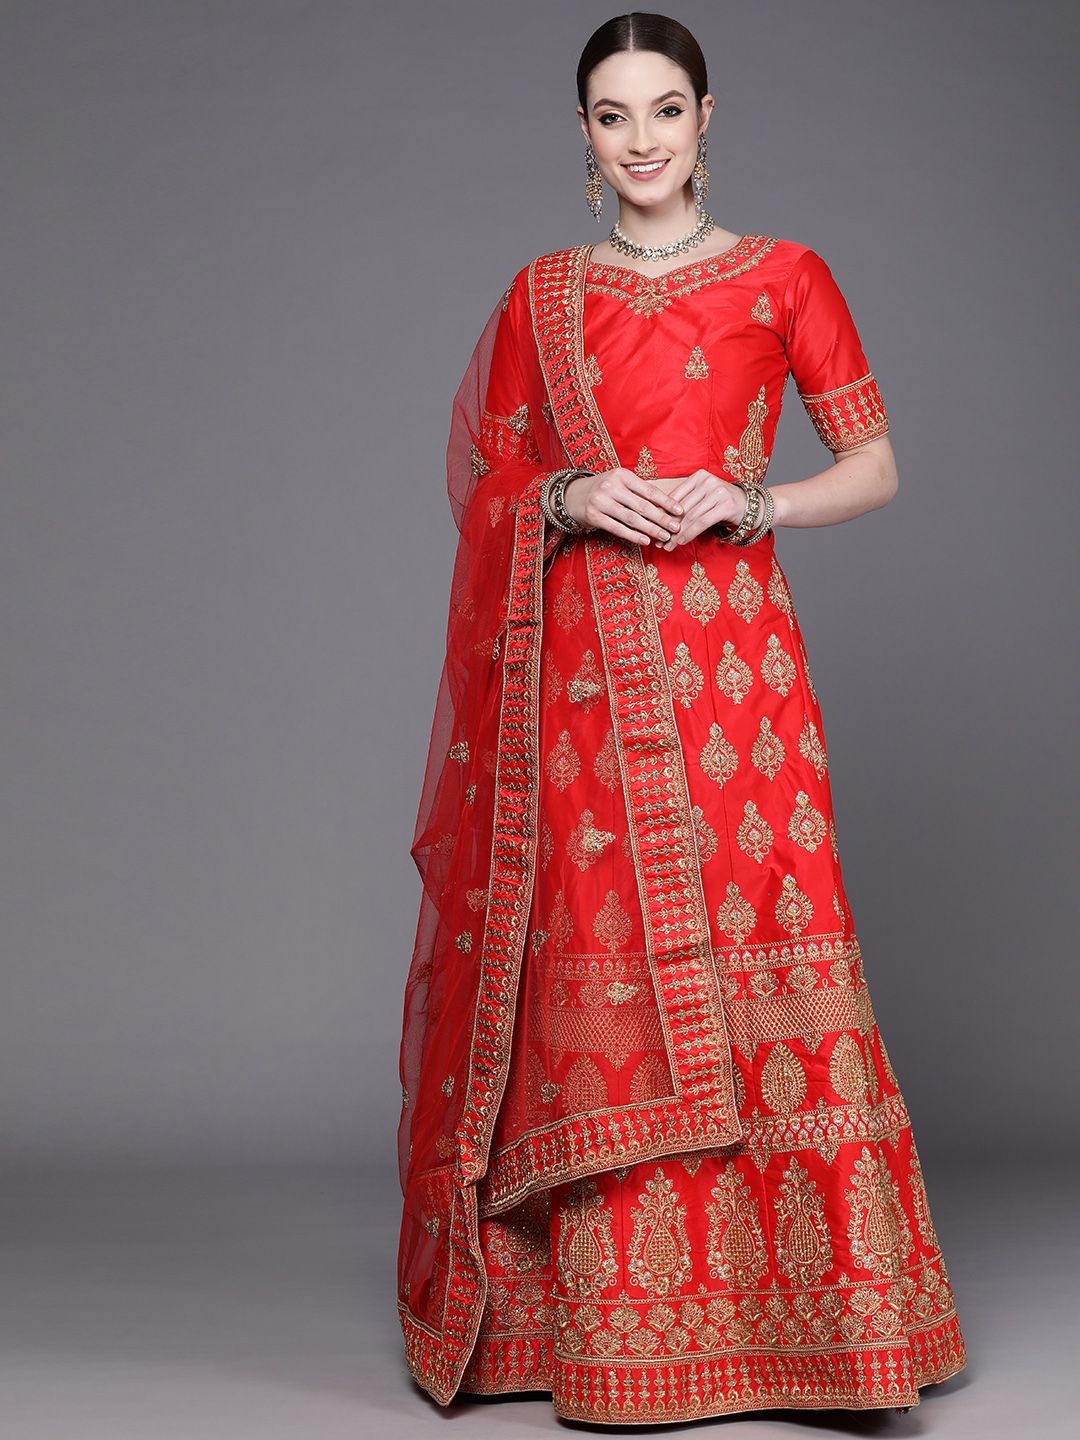 Mitera Red & Gold-Toned Embroidered Semi-Stitched Lehenga & Unstitched Blouse With Dupatta Price in India